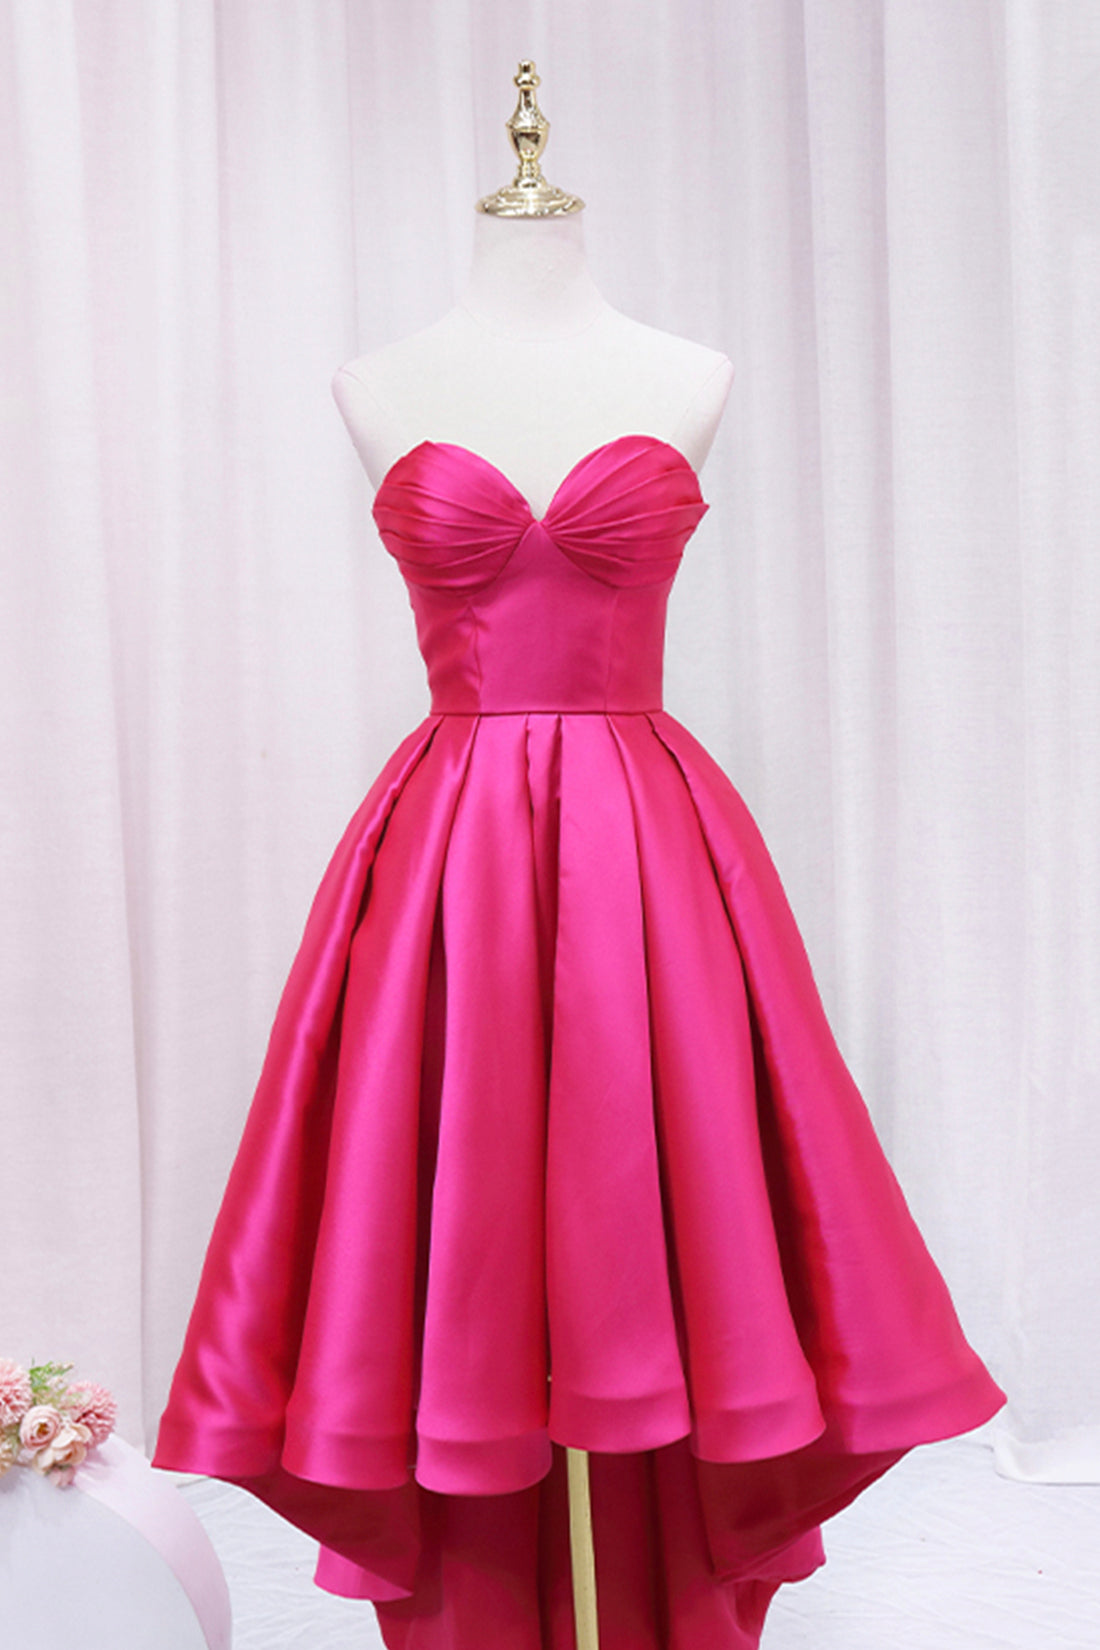 Prom Dress Shorts, Hot Pink Satin High Low Prom Dress, Cute Sweetheart Neck Evening Party Dress